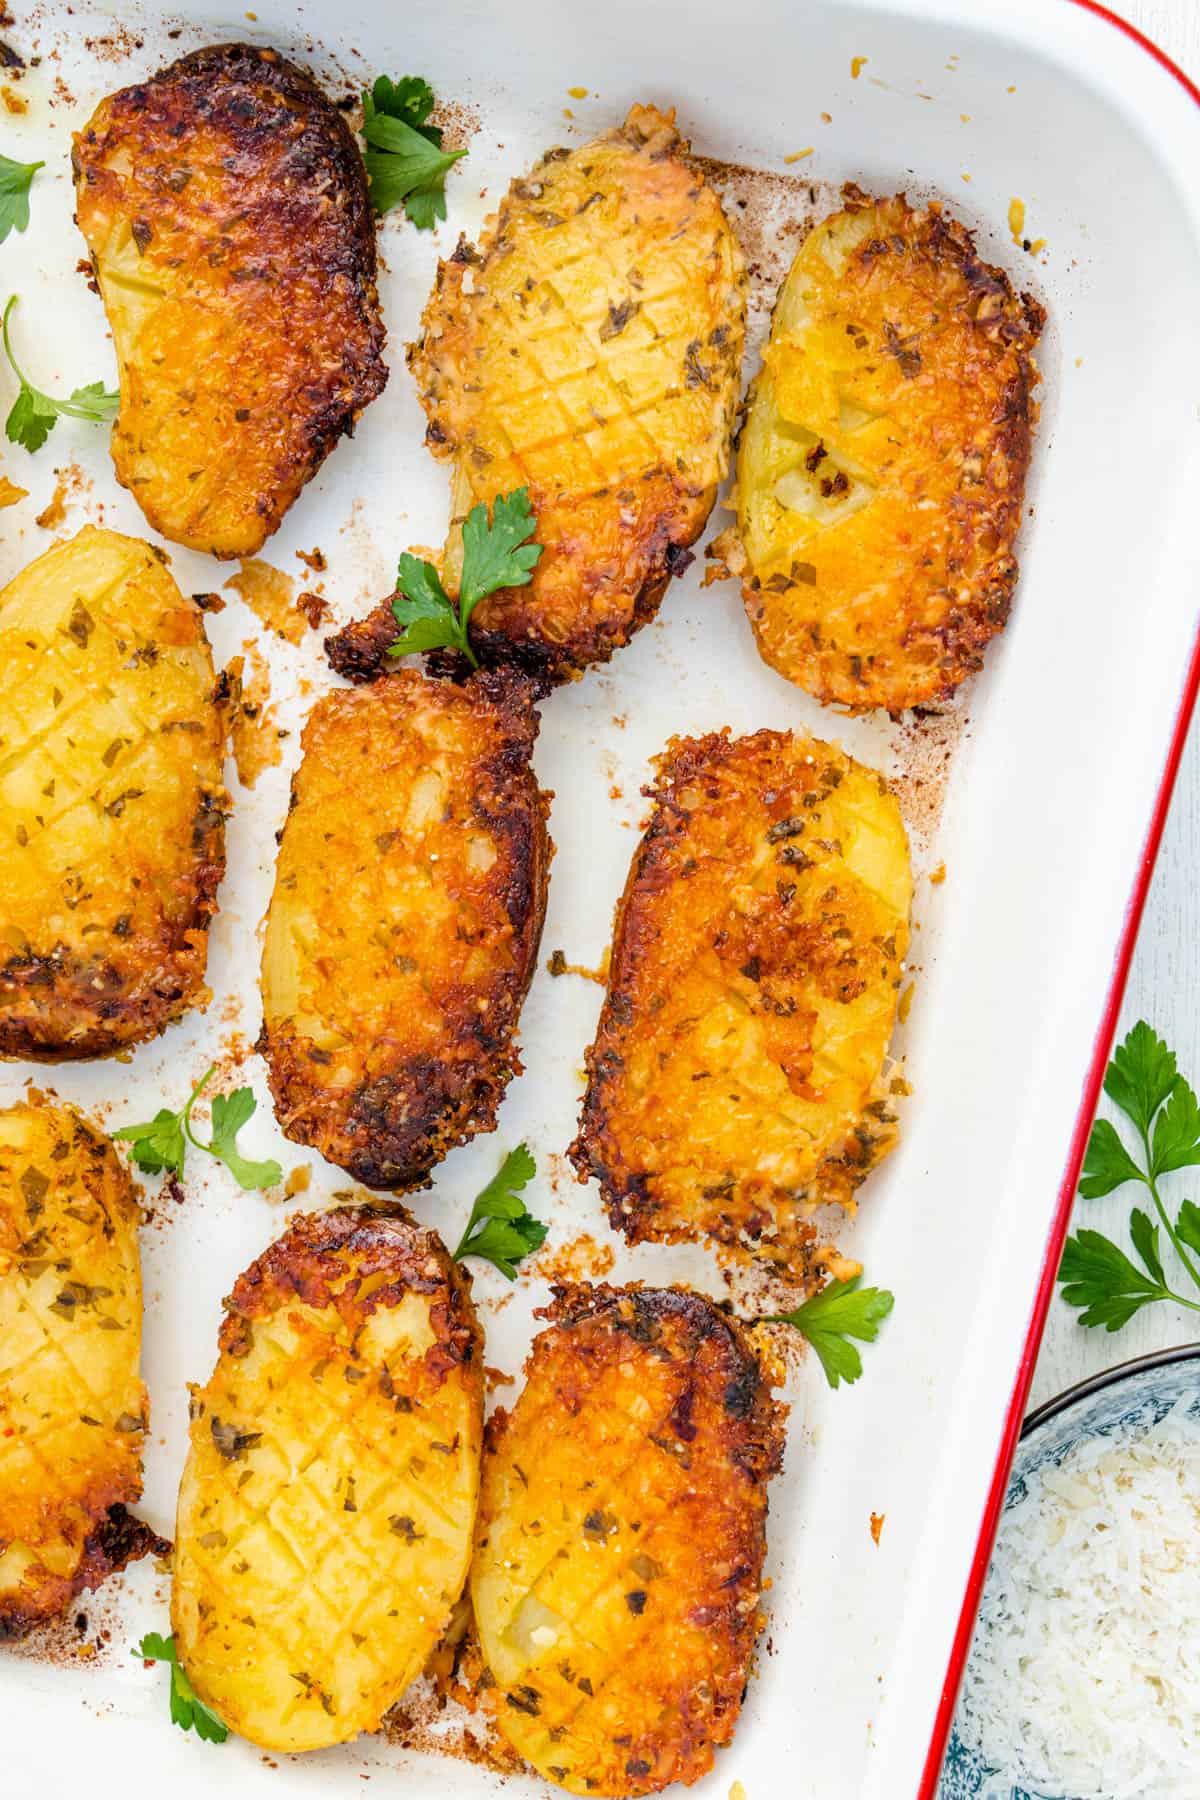 Tray of parmesan crusted potatoes ready to be served